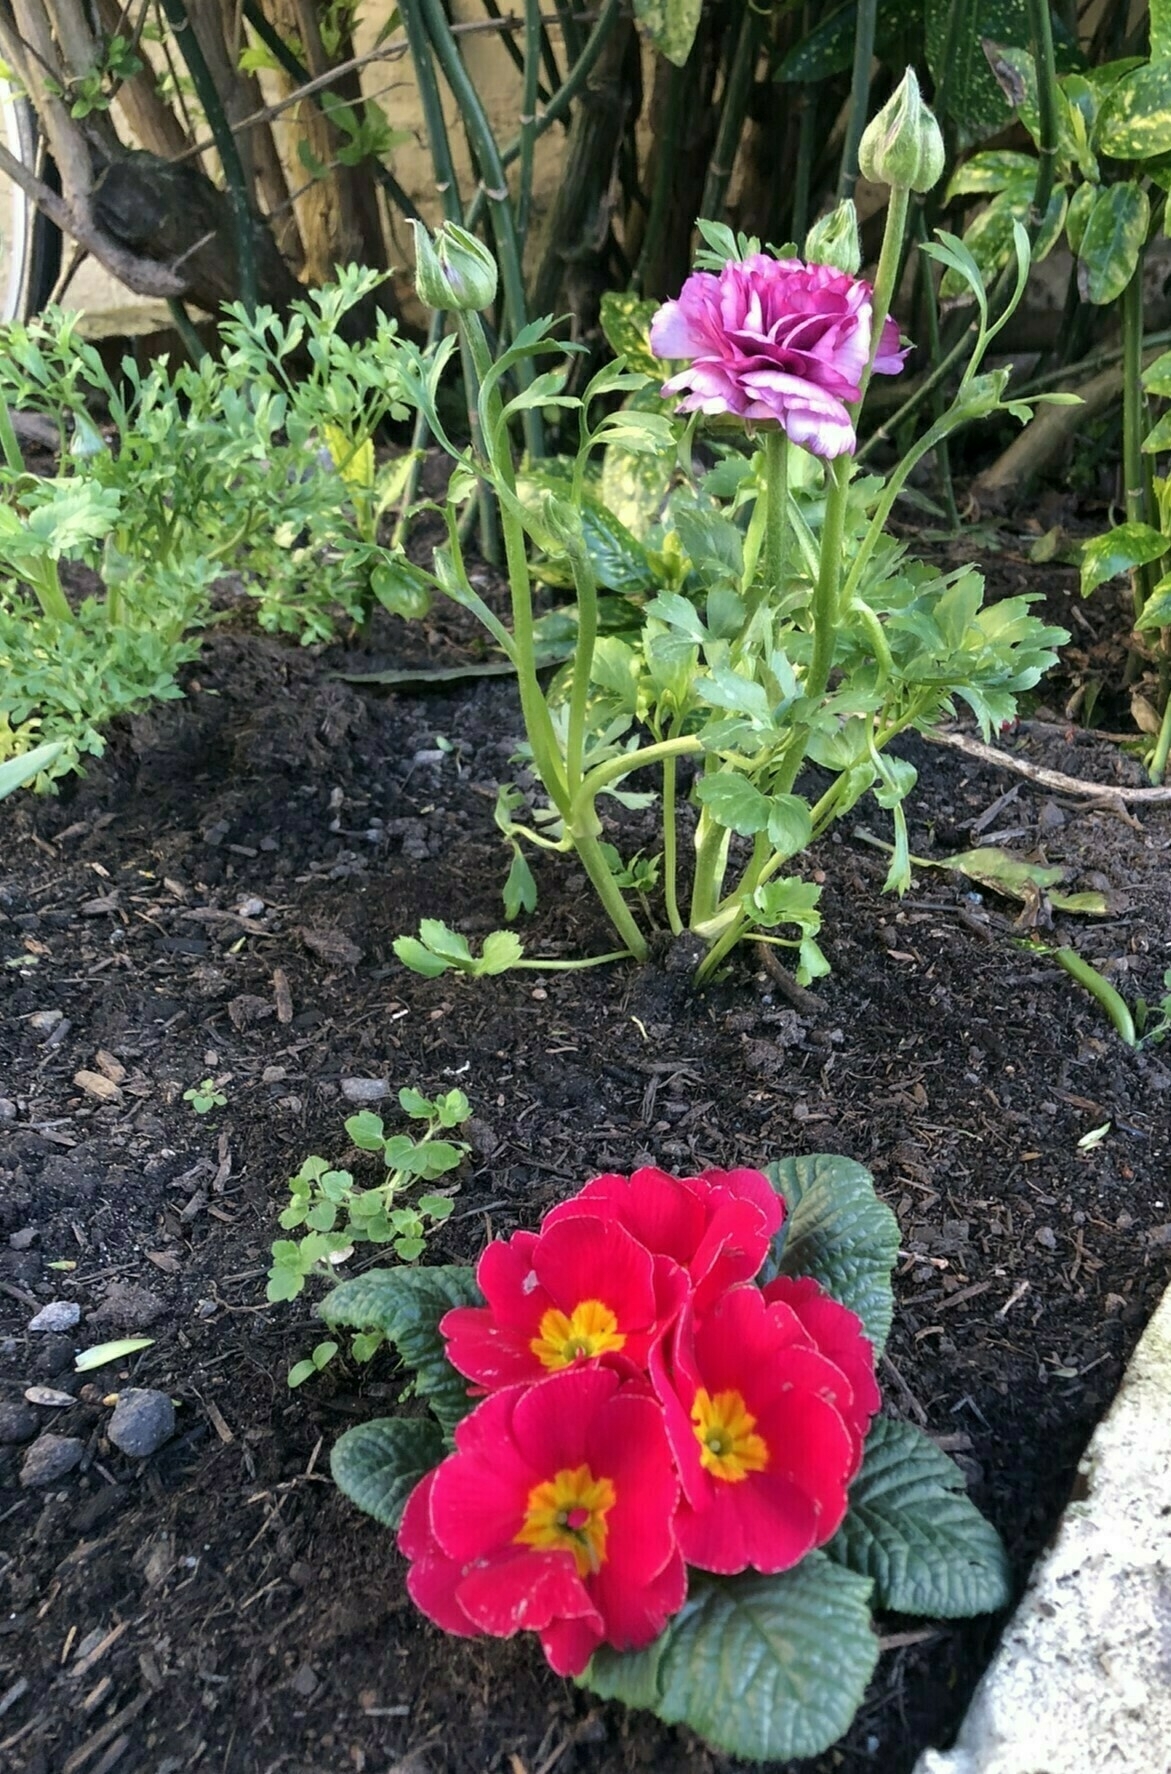 pink primula planted in front of a dusky pink Ranunculus in a bed of dark soil and greenery